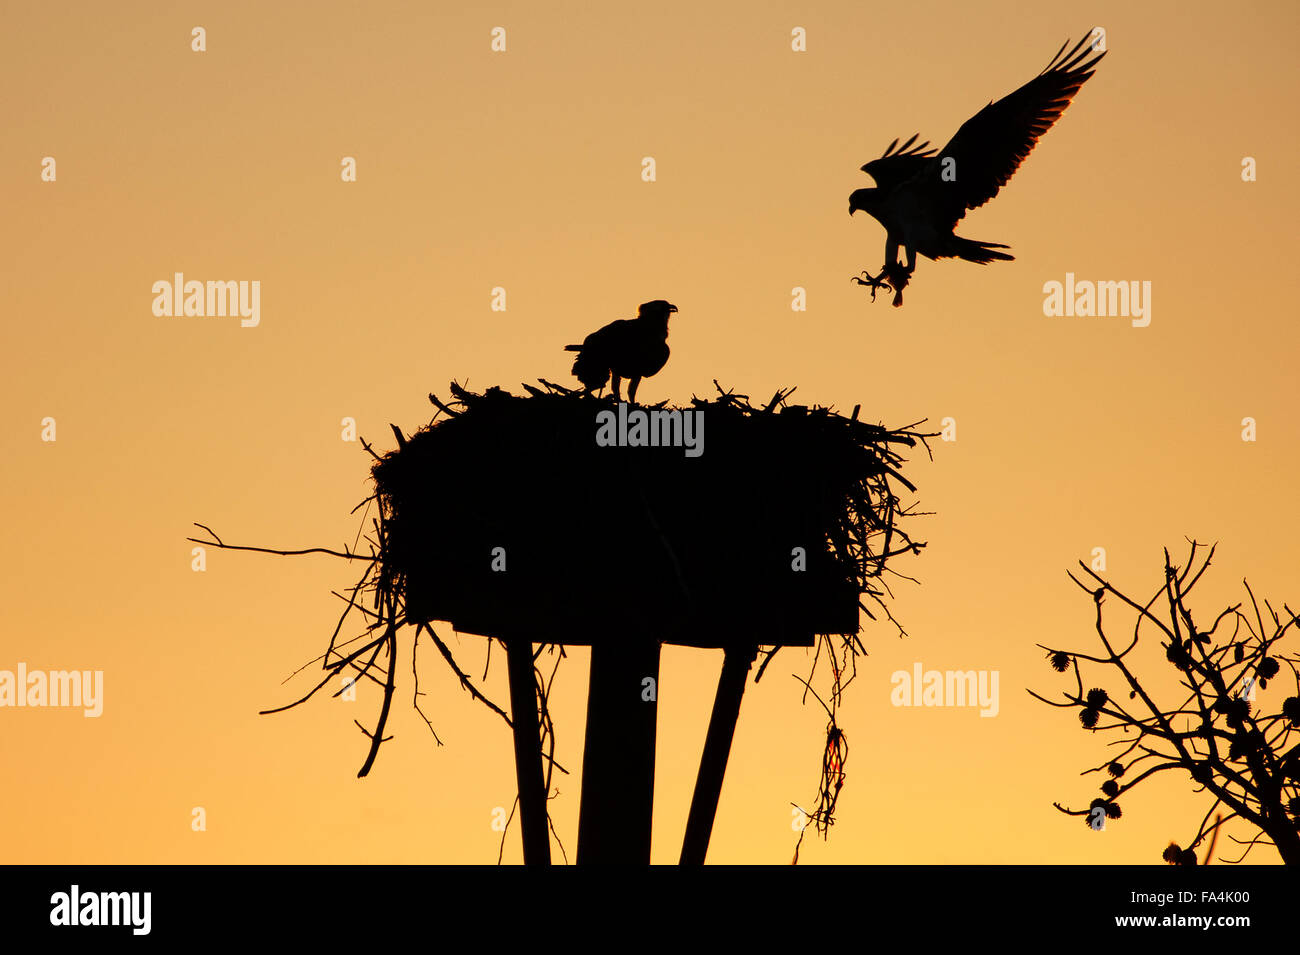 Silhouette of osprey bringing fish to fledglings, Stock Photo